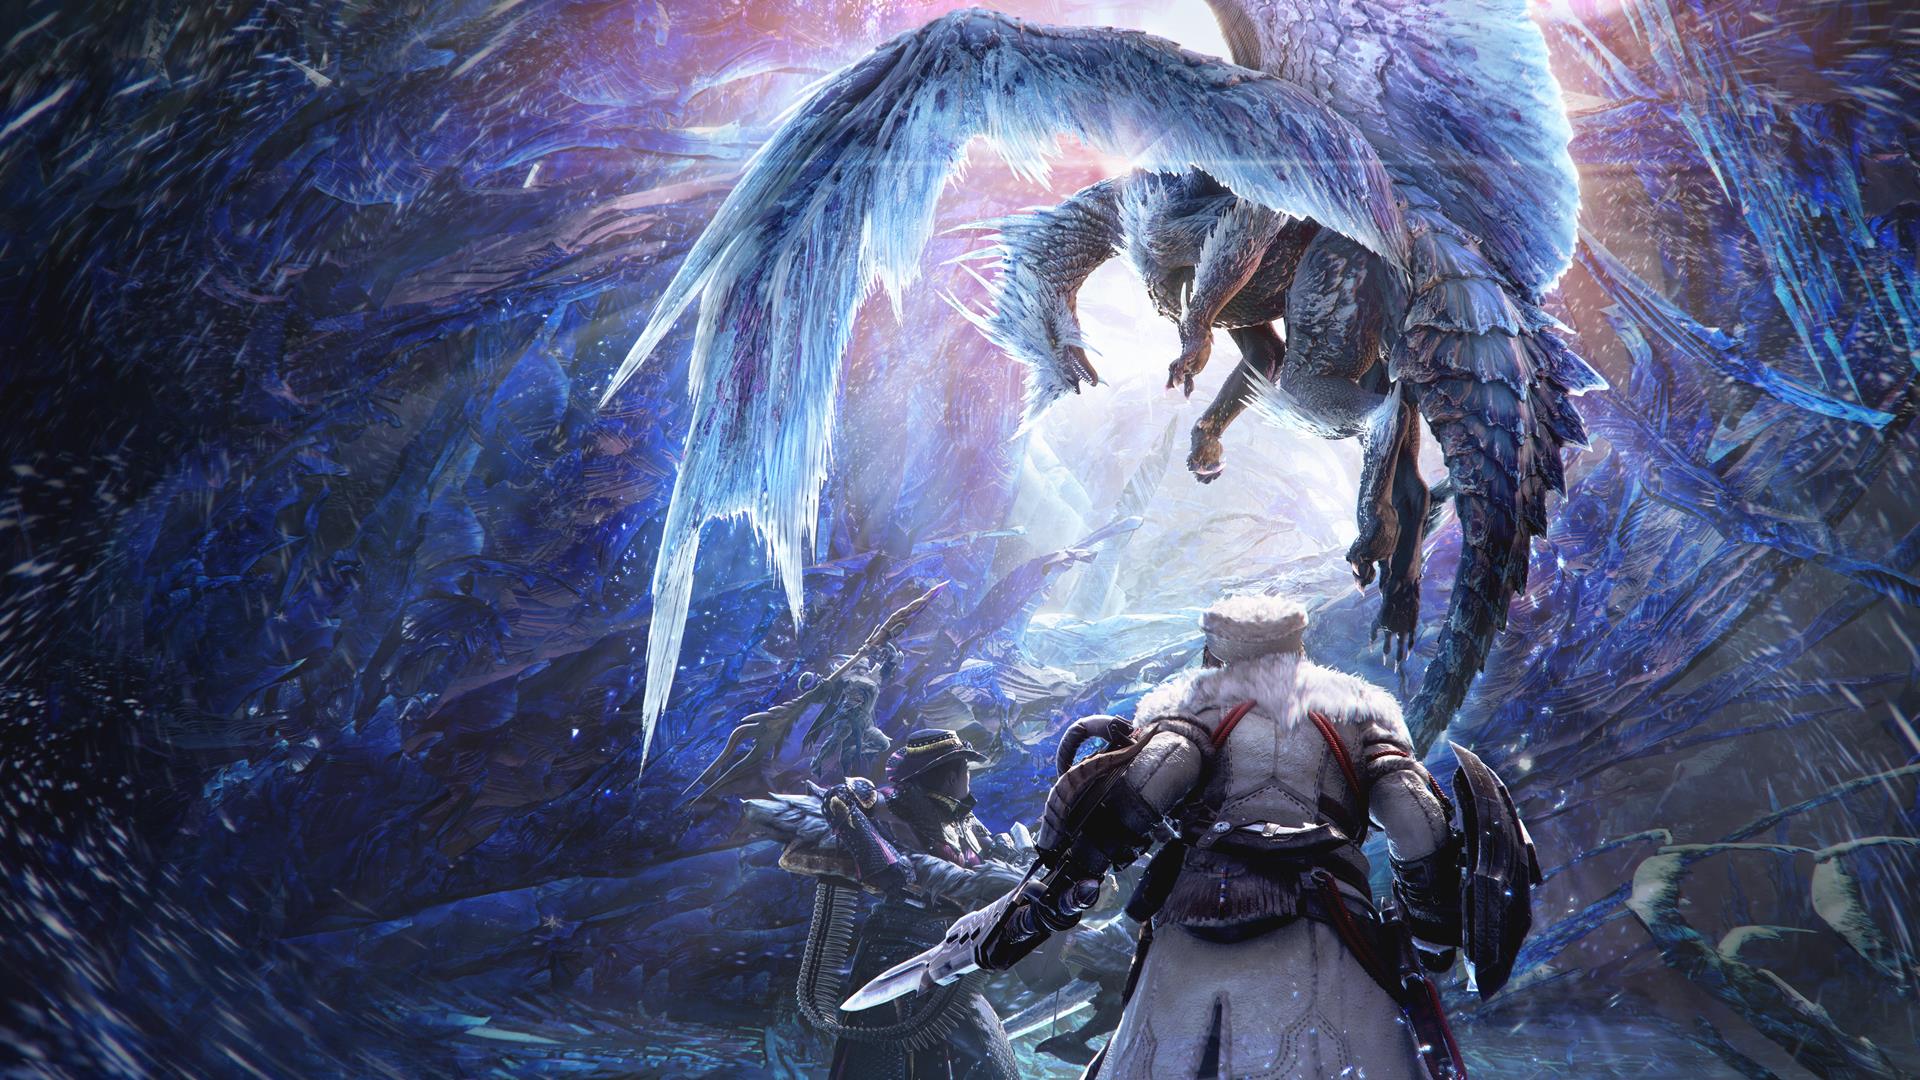 Image for The best deals for Monster Hunter World: Iceborne on PC and console